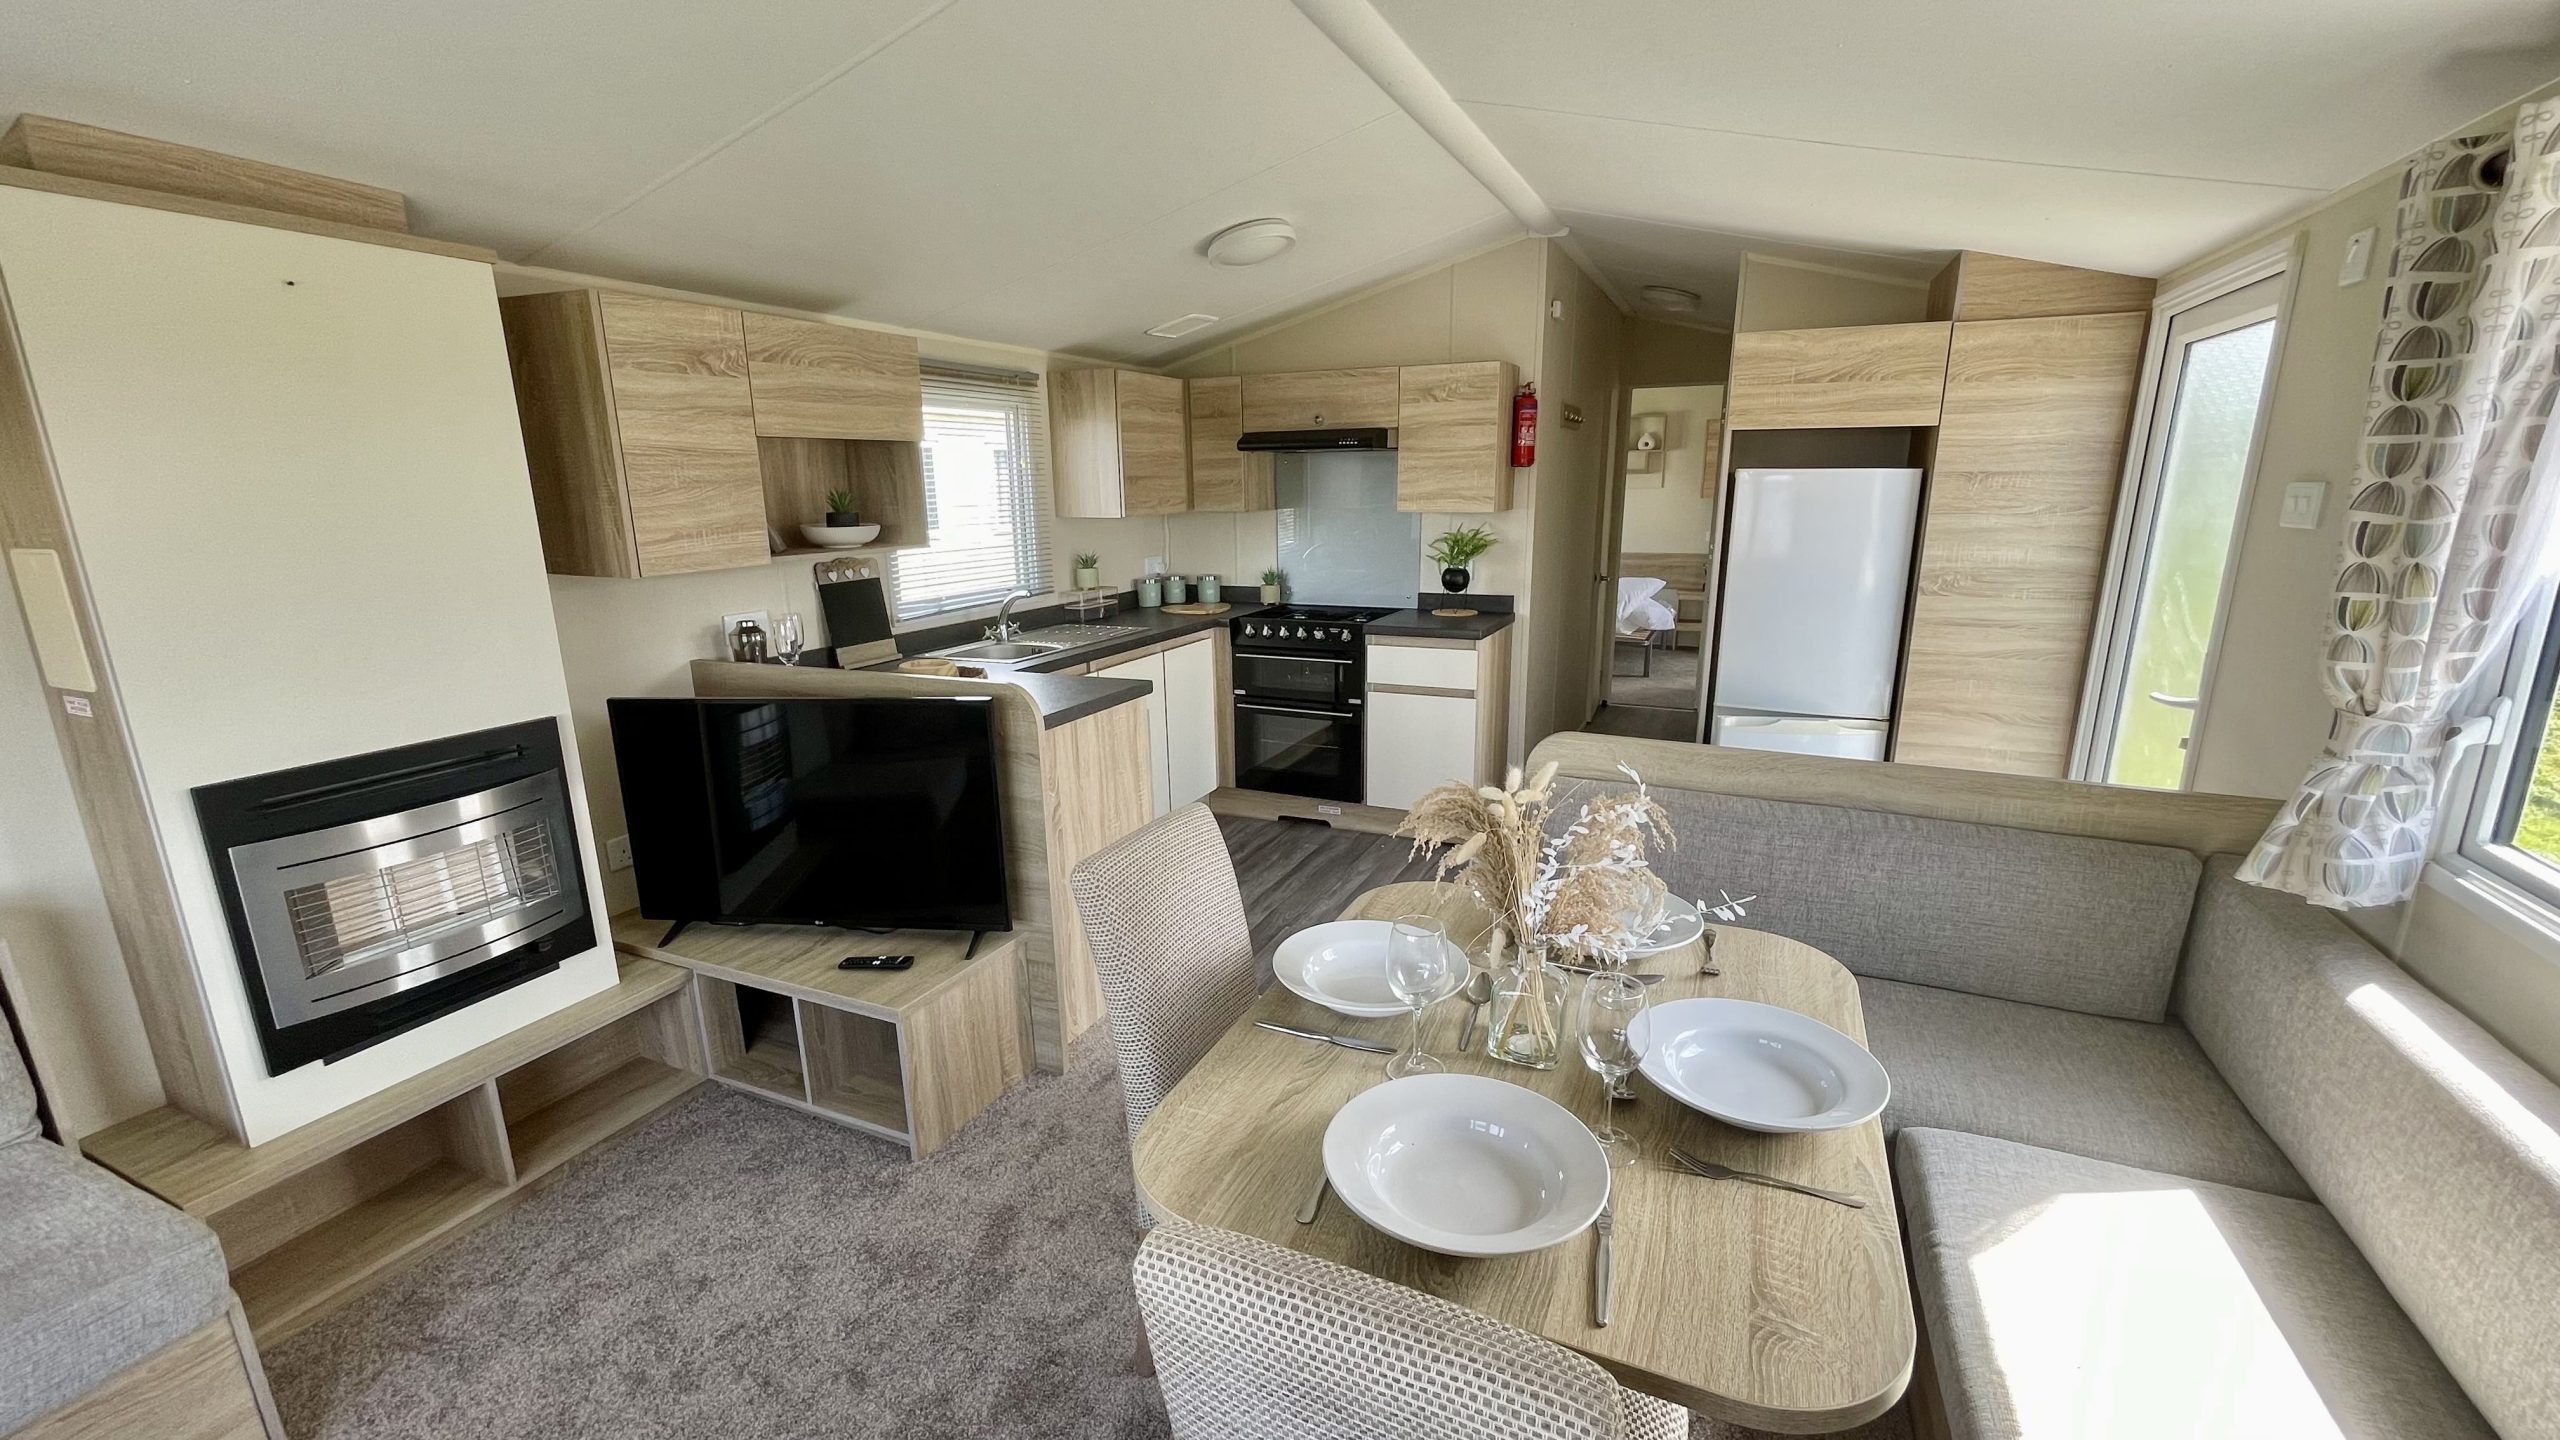 2016 Willerby Lymington for sale at St Audries Bay Holiday Club, Somerset